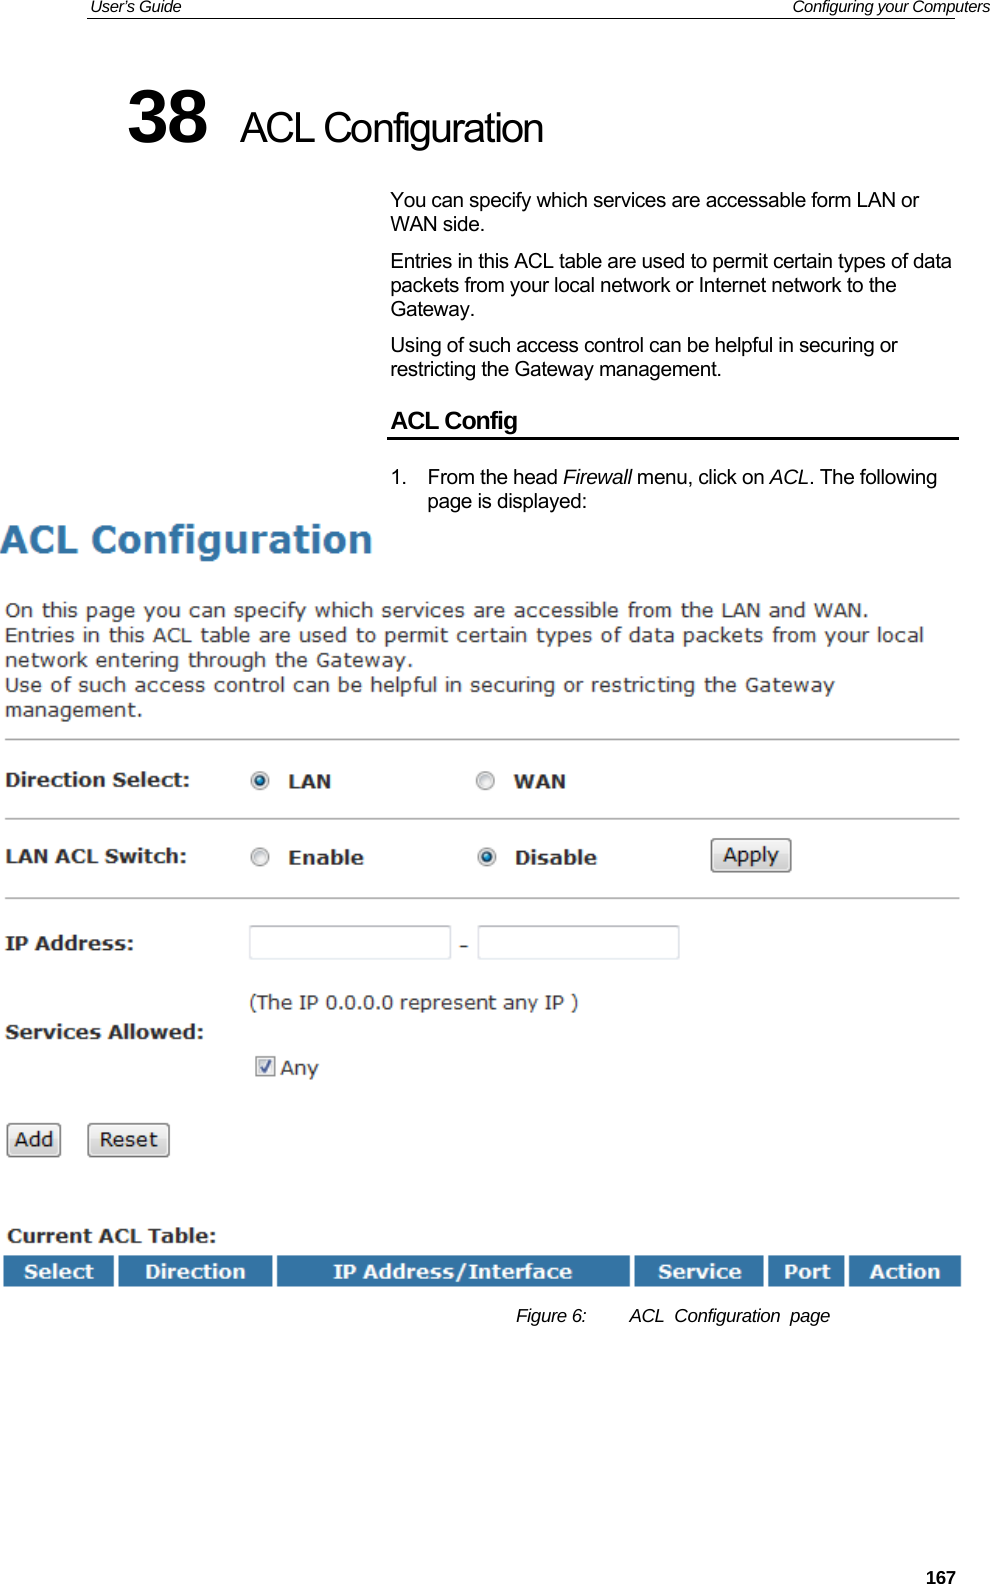 User’s Guide   Configuring your Computers 38  ACL Configuration You can specify which services are accessable form LAN or WAN side. Entries in this ACL table are used to permit certain types of data packets from your local network or Internet network to the Gateway. Using of such access control can be helpful in securing or restricting the Gateway management. ACL Config 1. From the head Firewall menu, click on ACL. The following page is displayed:  Figure 6:  ACL  Configuration  page     167